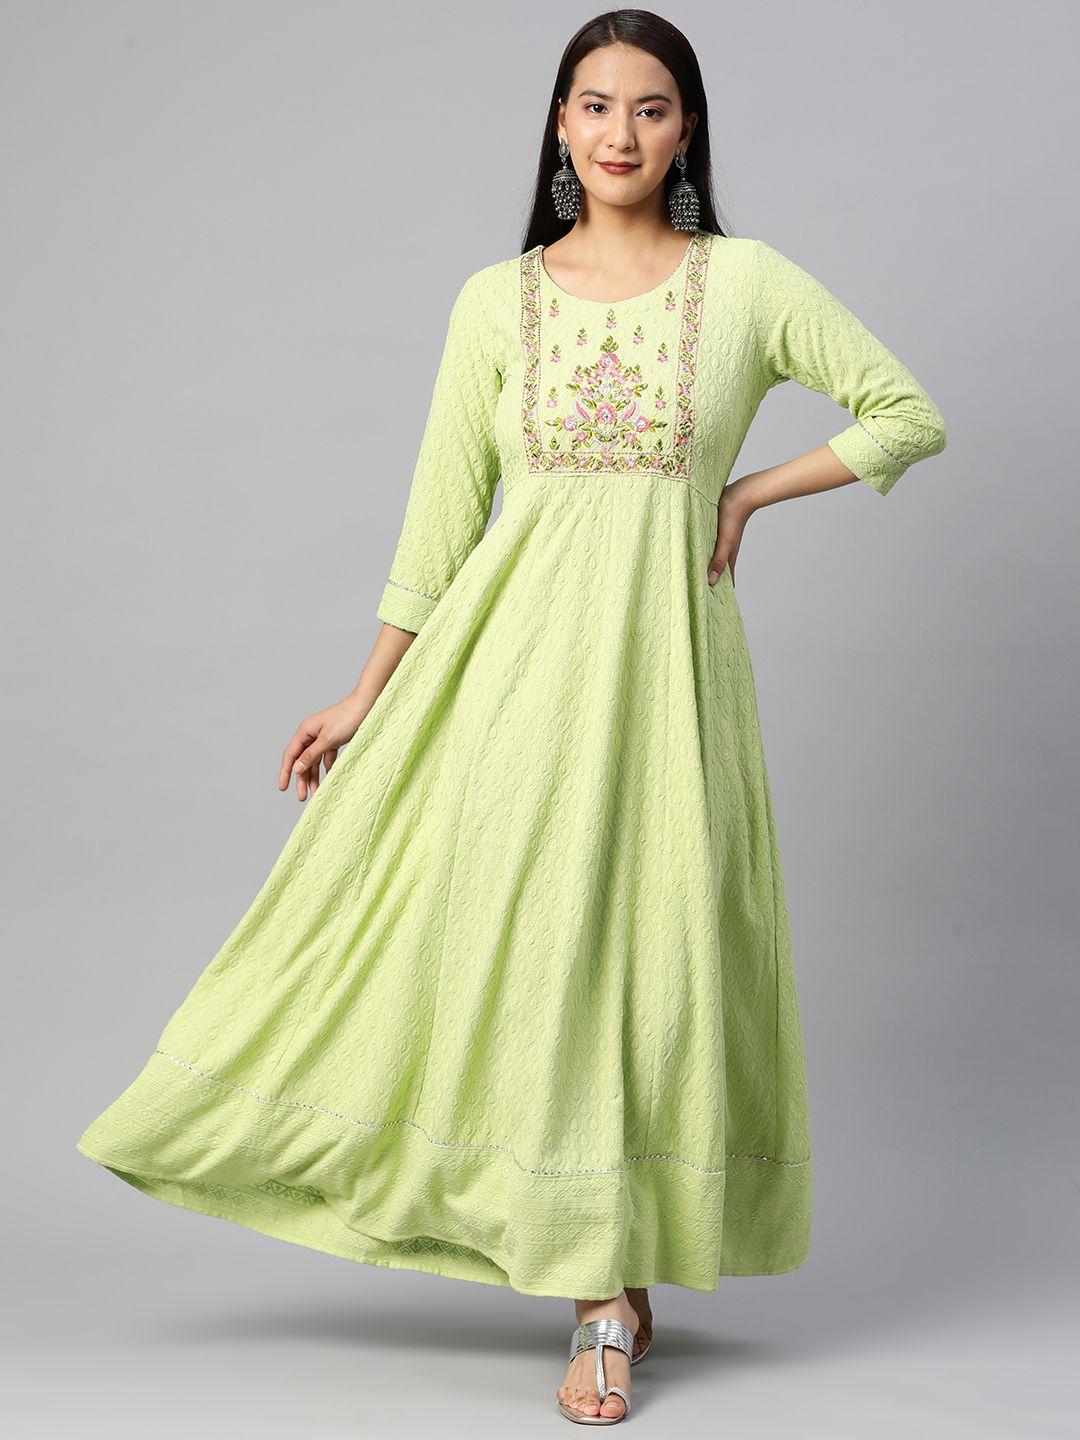 readiprint fashions green floral embroidered cotton ethnic maxi dress